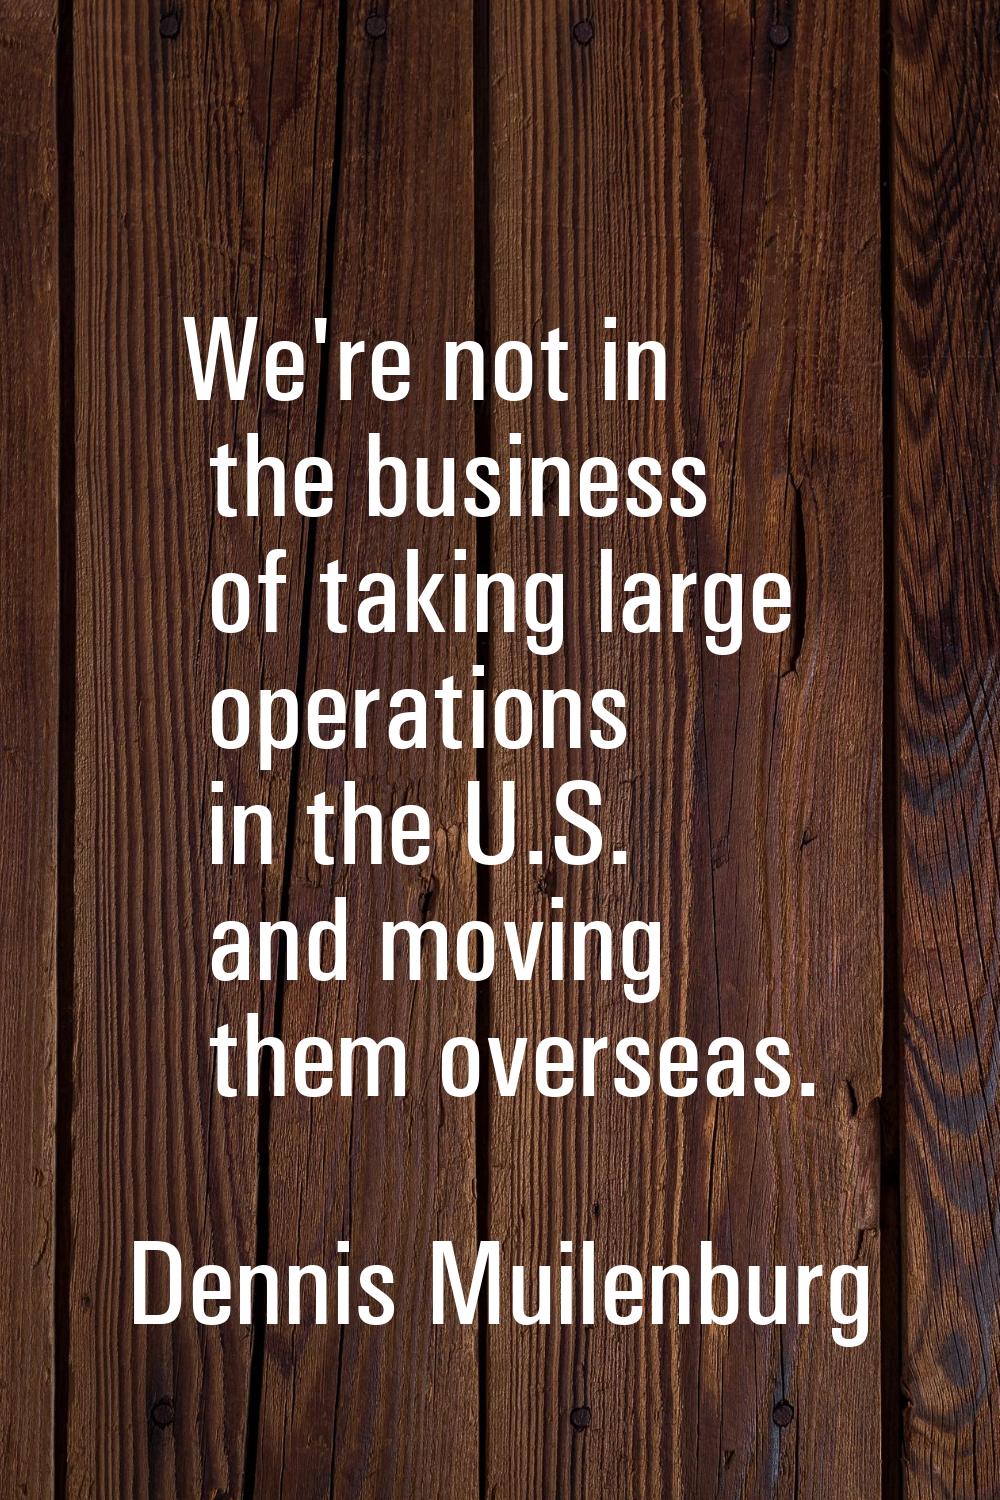 We're not in the business of taking large operations in the U.S. and moving them overseas.